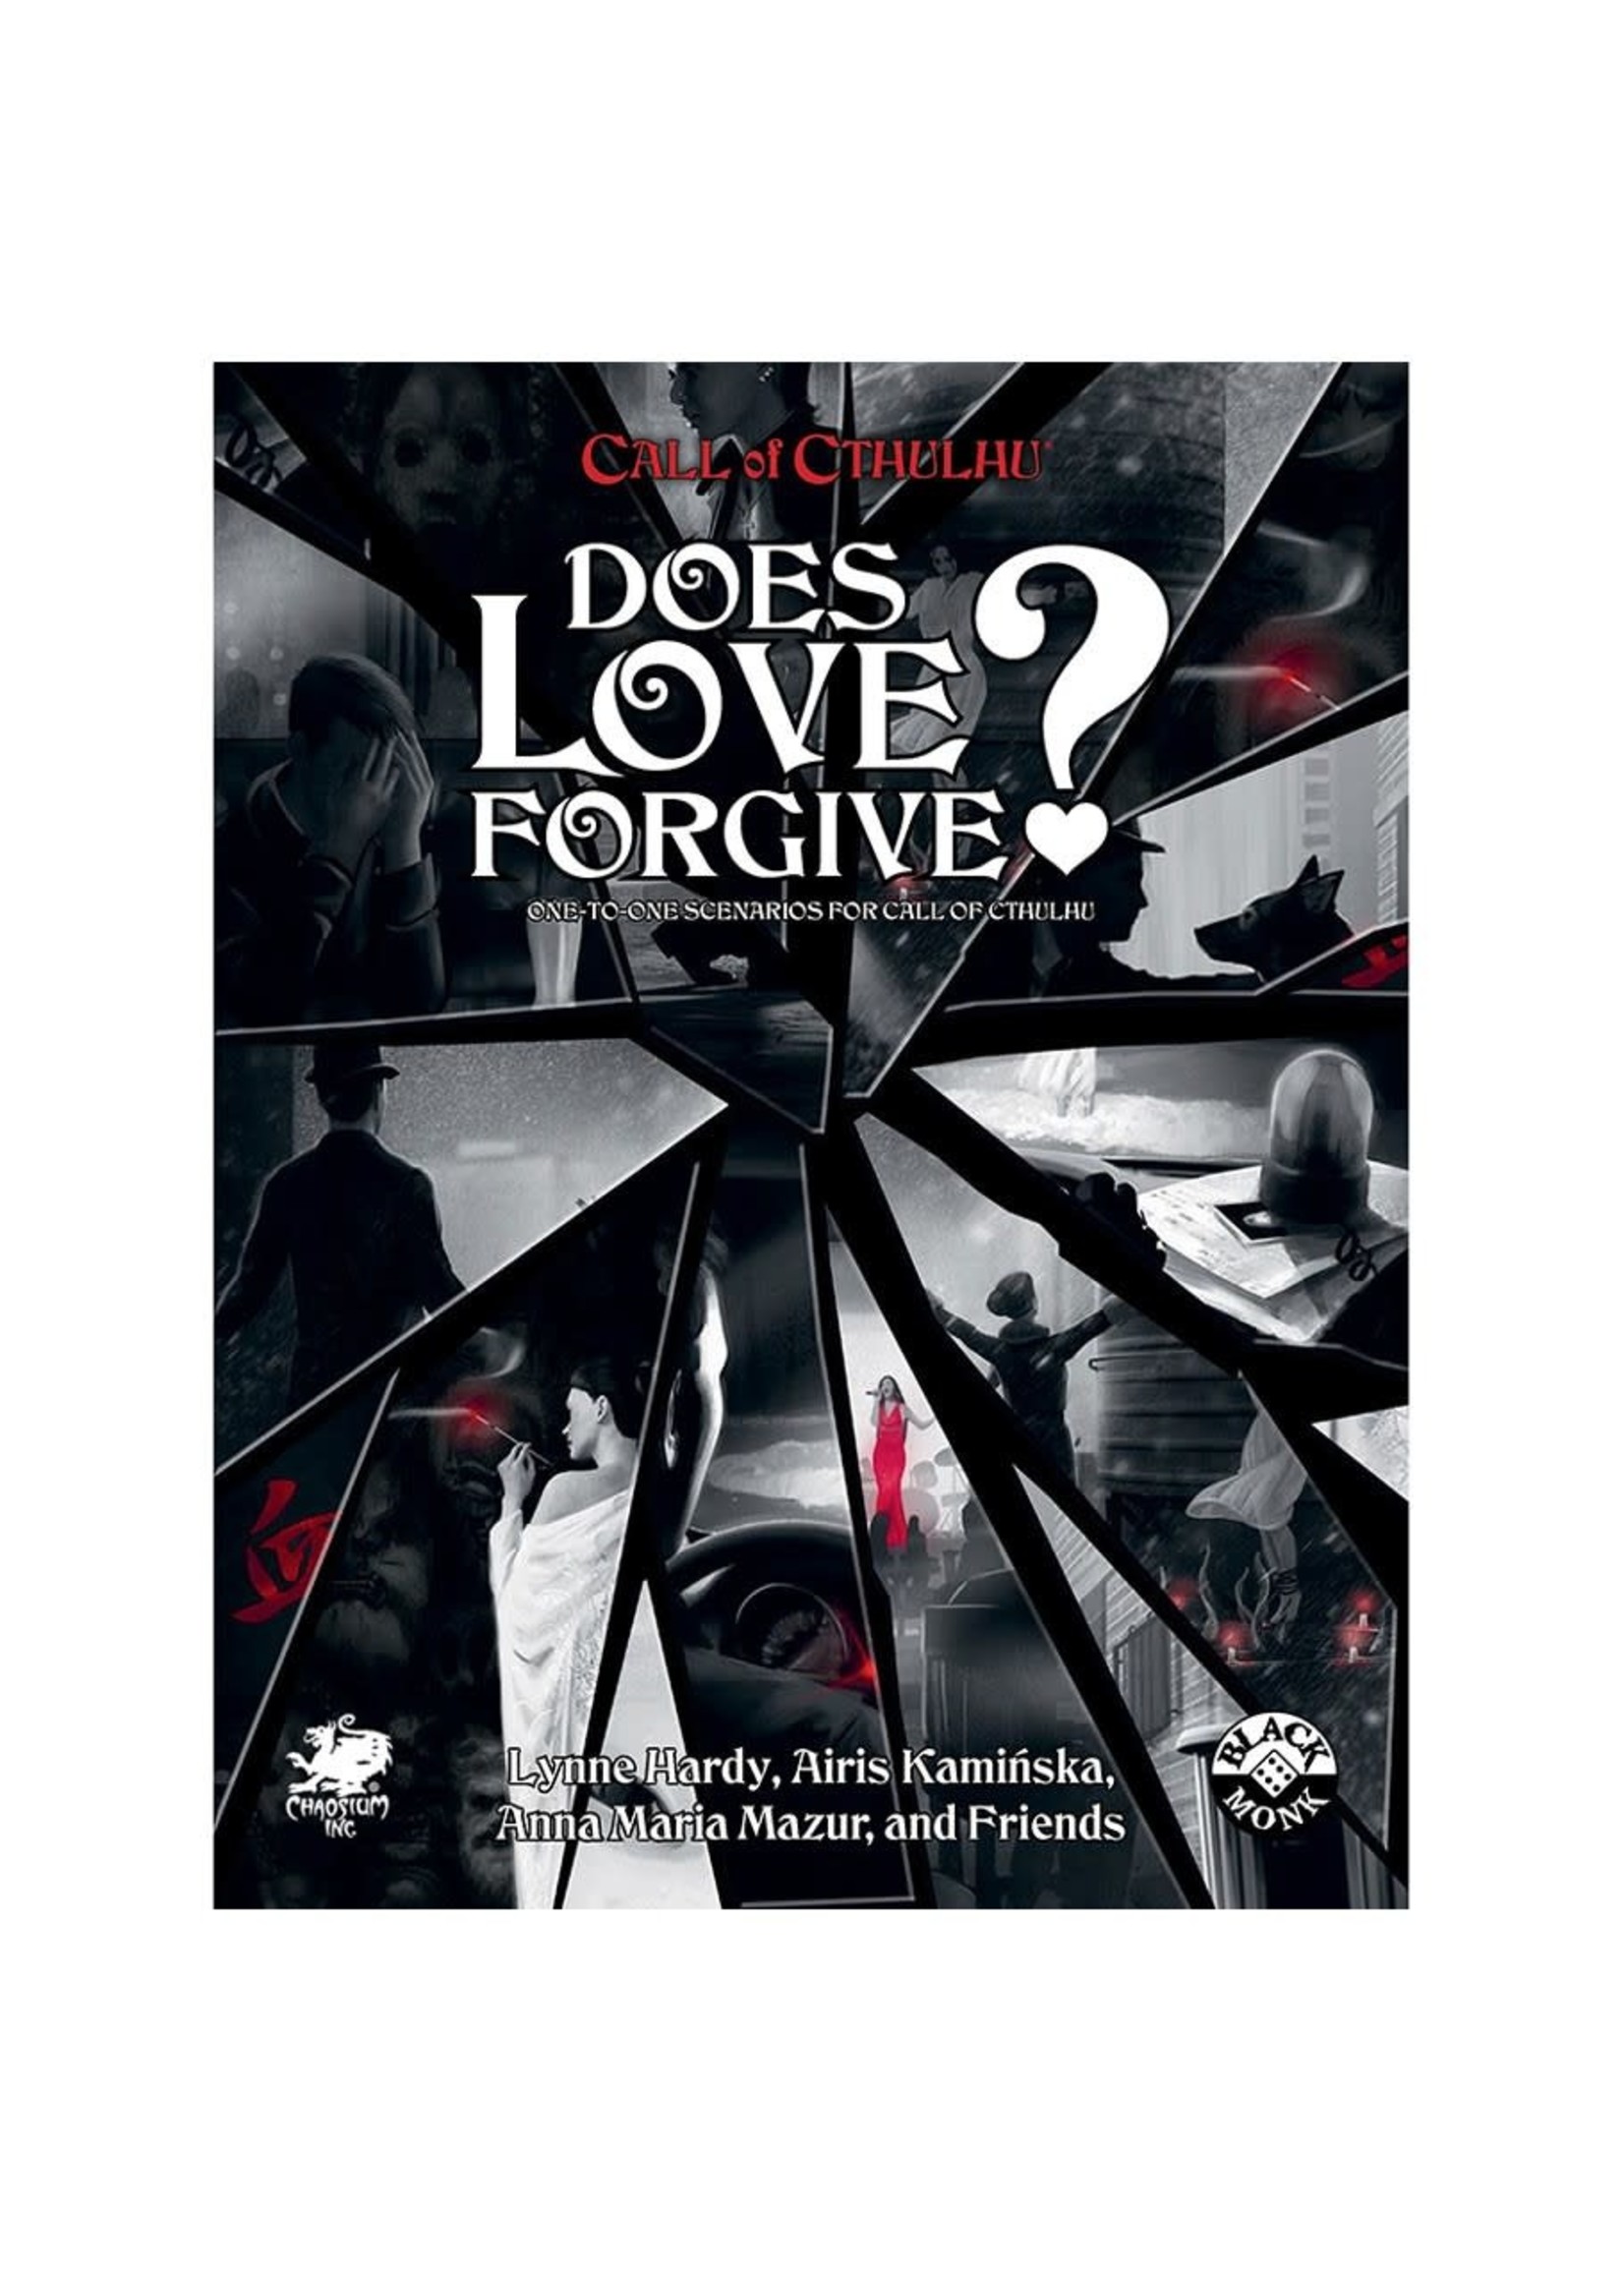 Chaosium Call of Cthulhu RPG: Does Love Forgive?